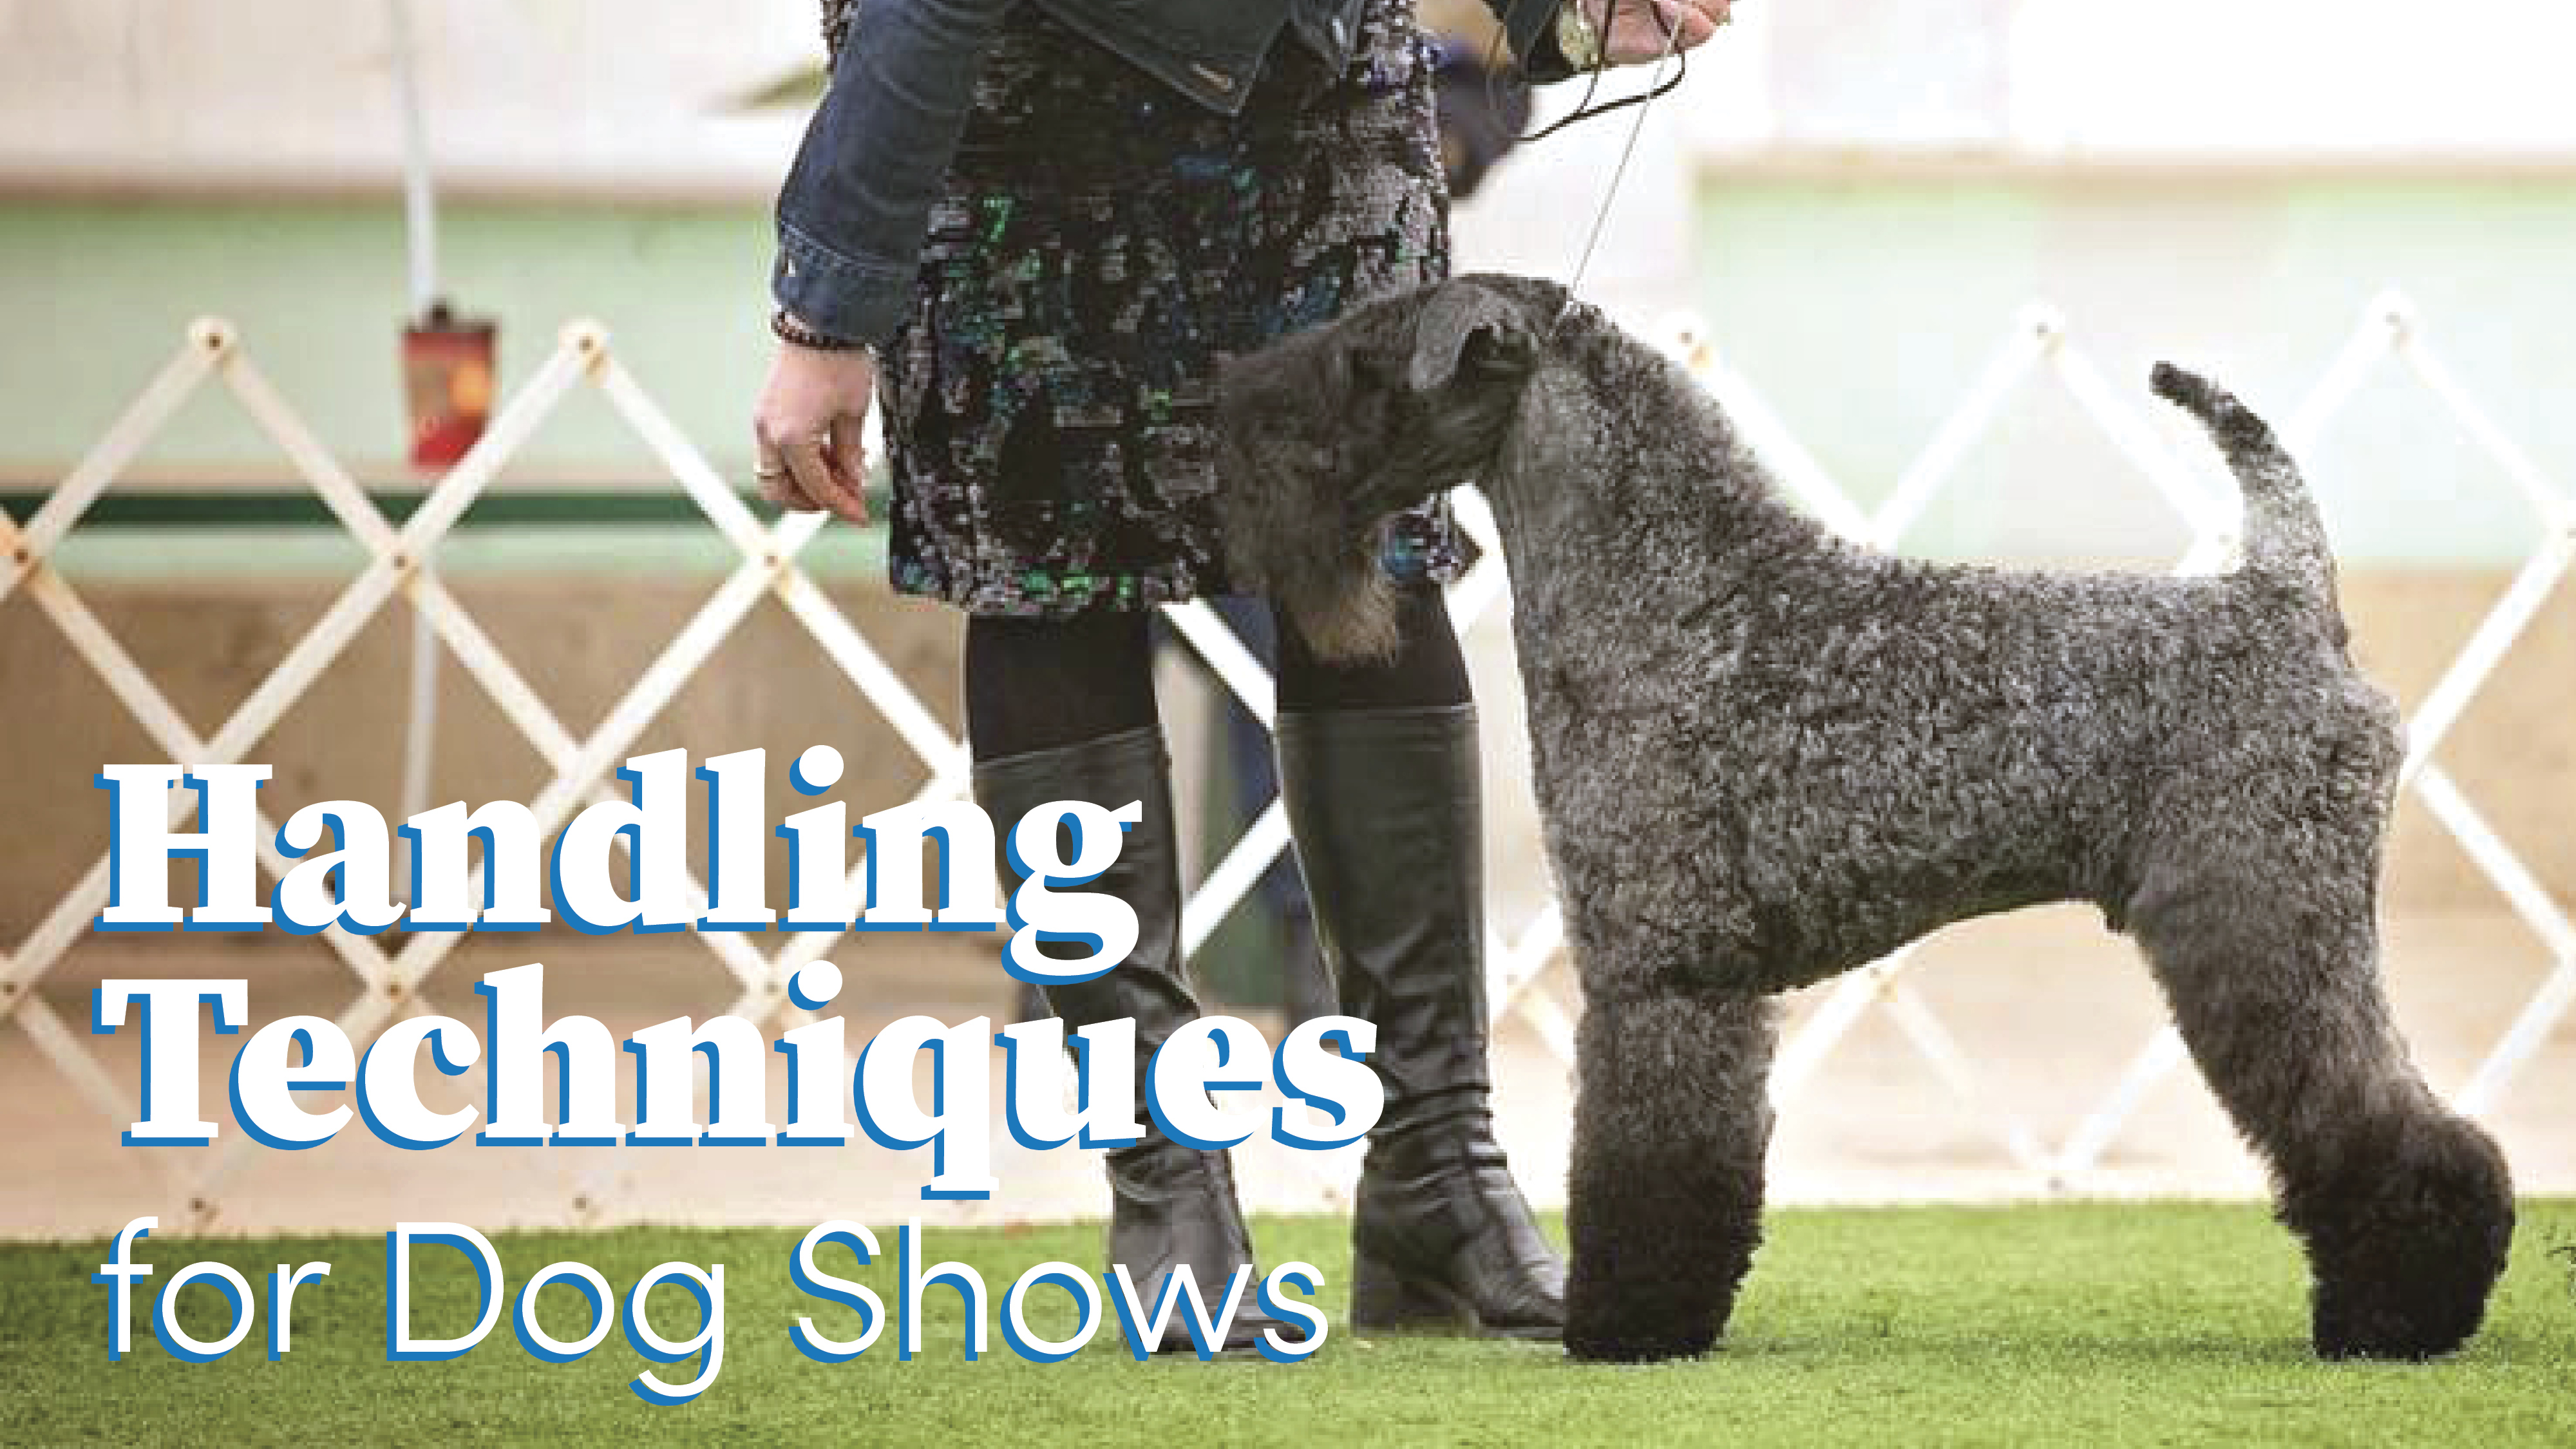 A Kerry Blue Terrier in the dog show ring. Captioned Handling Techniques for Dog Shows